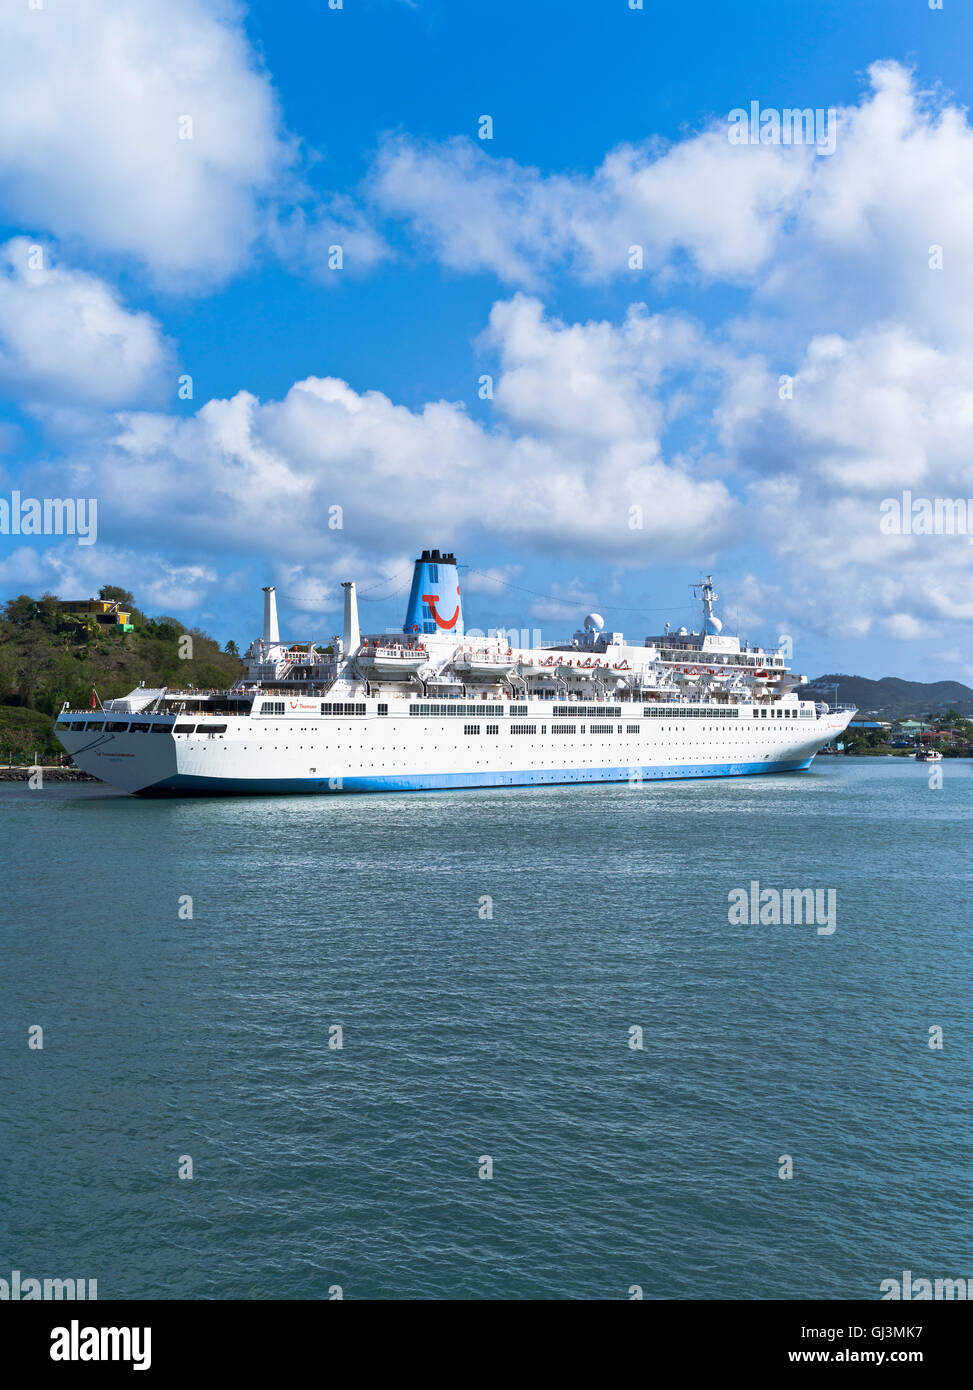 dh  CRUISE SHIP CARIBBEAN Thomson cruise liner Basseterre St Kitts west indies islands island Stock Photo